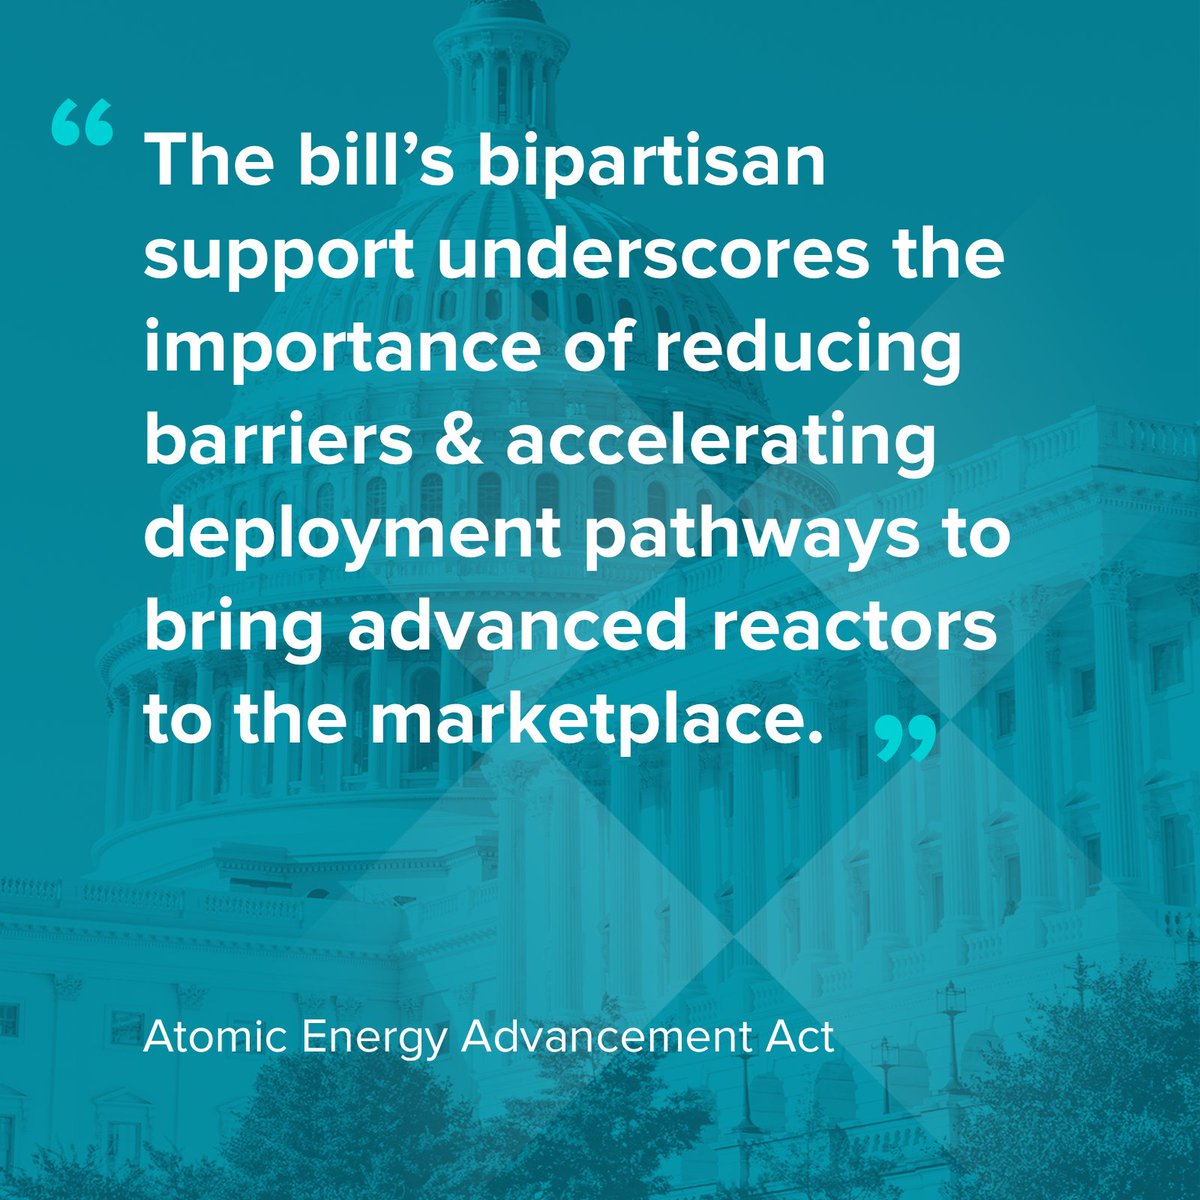 X-energy applauds the passage of the Atomic Energy Advancement Act in the U.S. House of Representatives, emphasizing the critical role advanced nuclear technologies will play to meet global energy demands. The bill’s bipartisan support underscores the importance of reducing